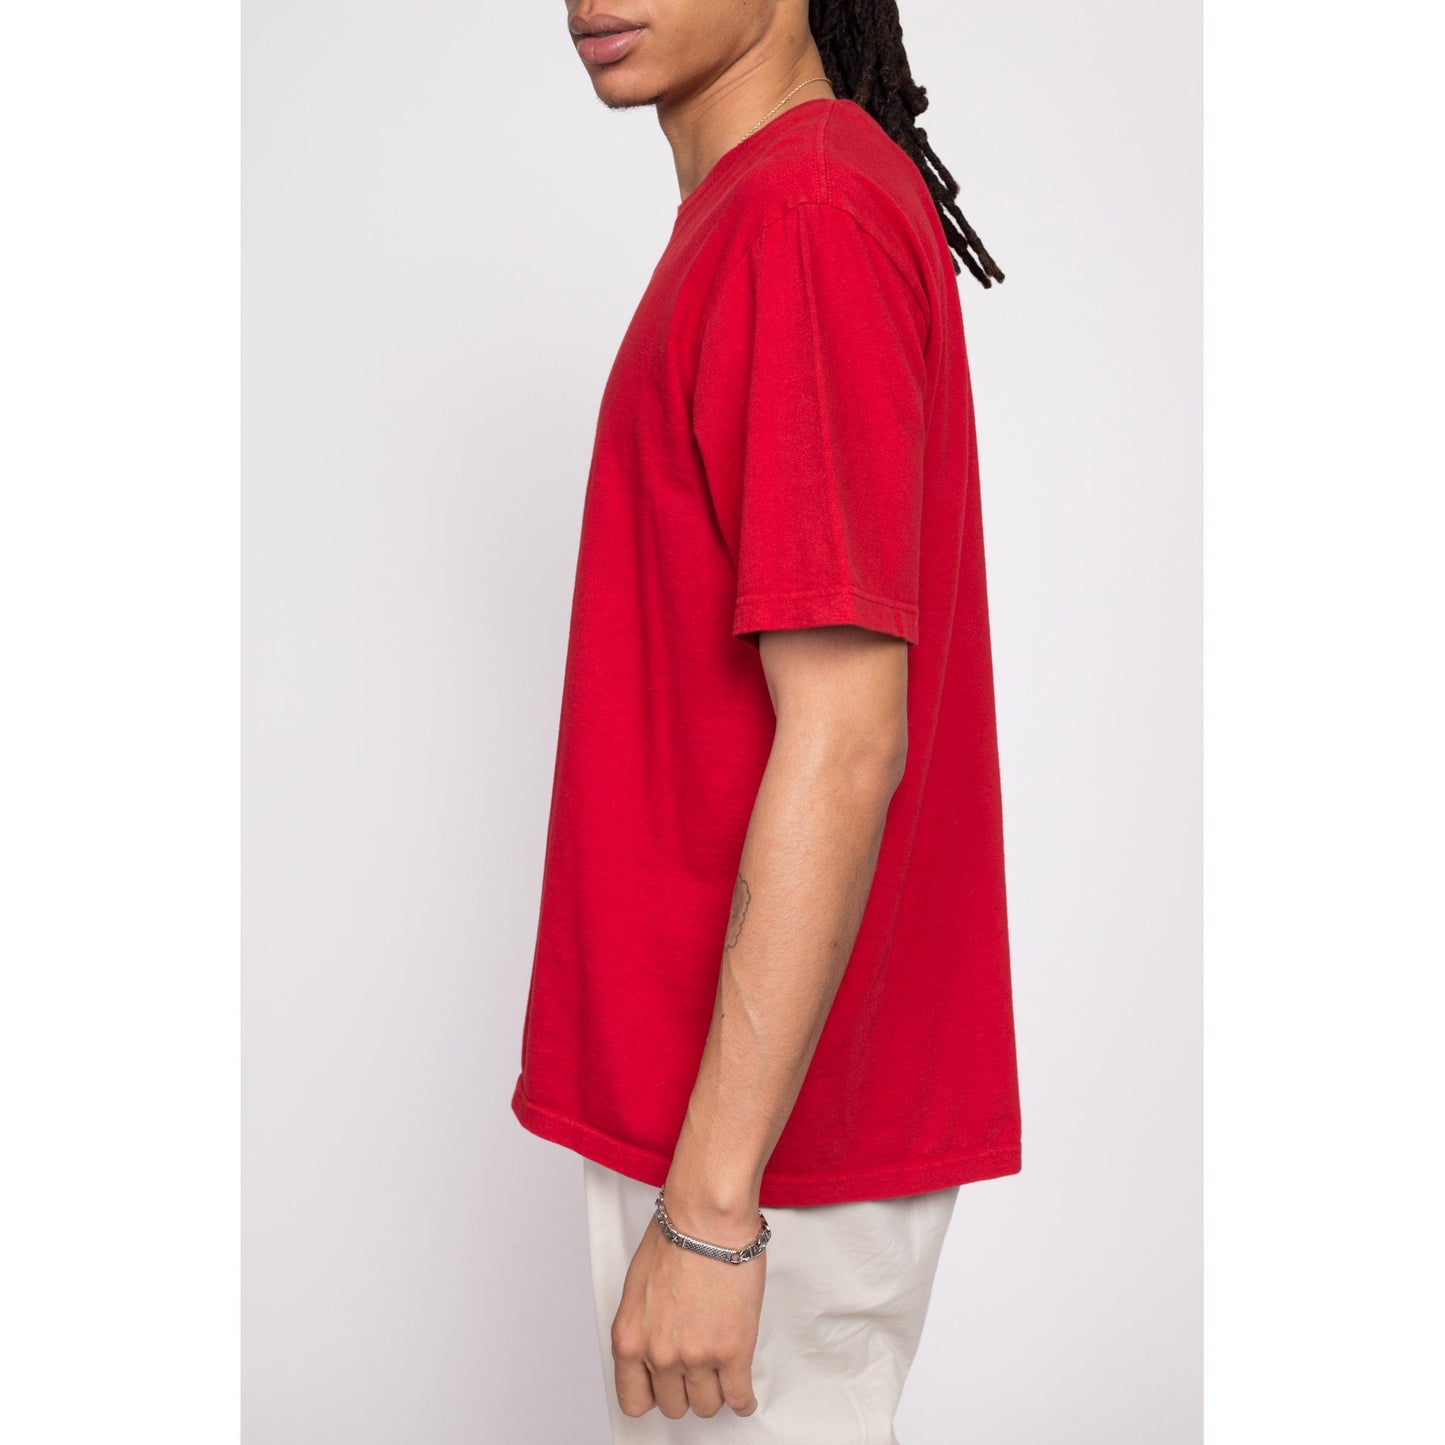 Supreme Prodigy x Hennessy T Shirt - Men's Medium | Authentic Red Rap Graphic Tee